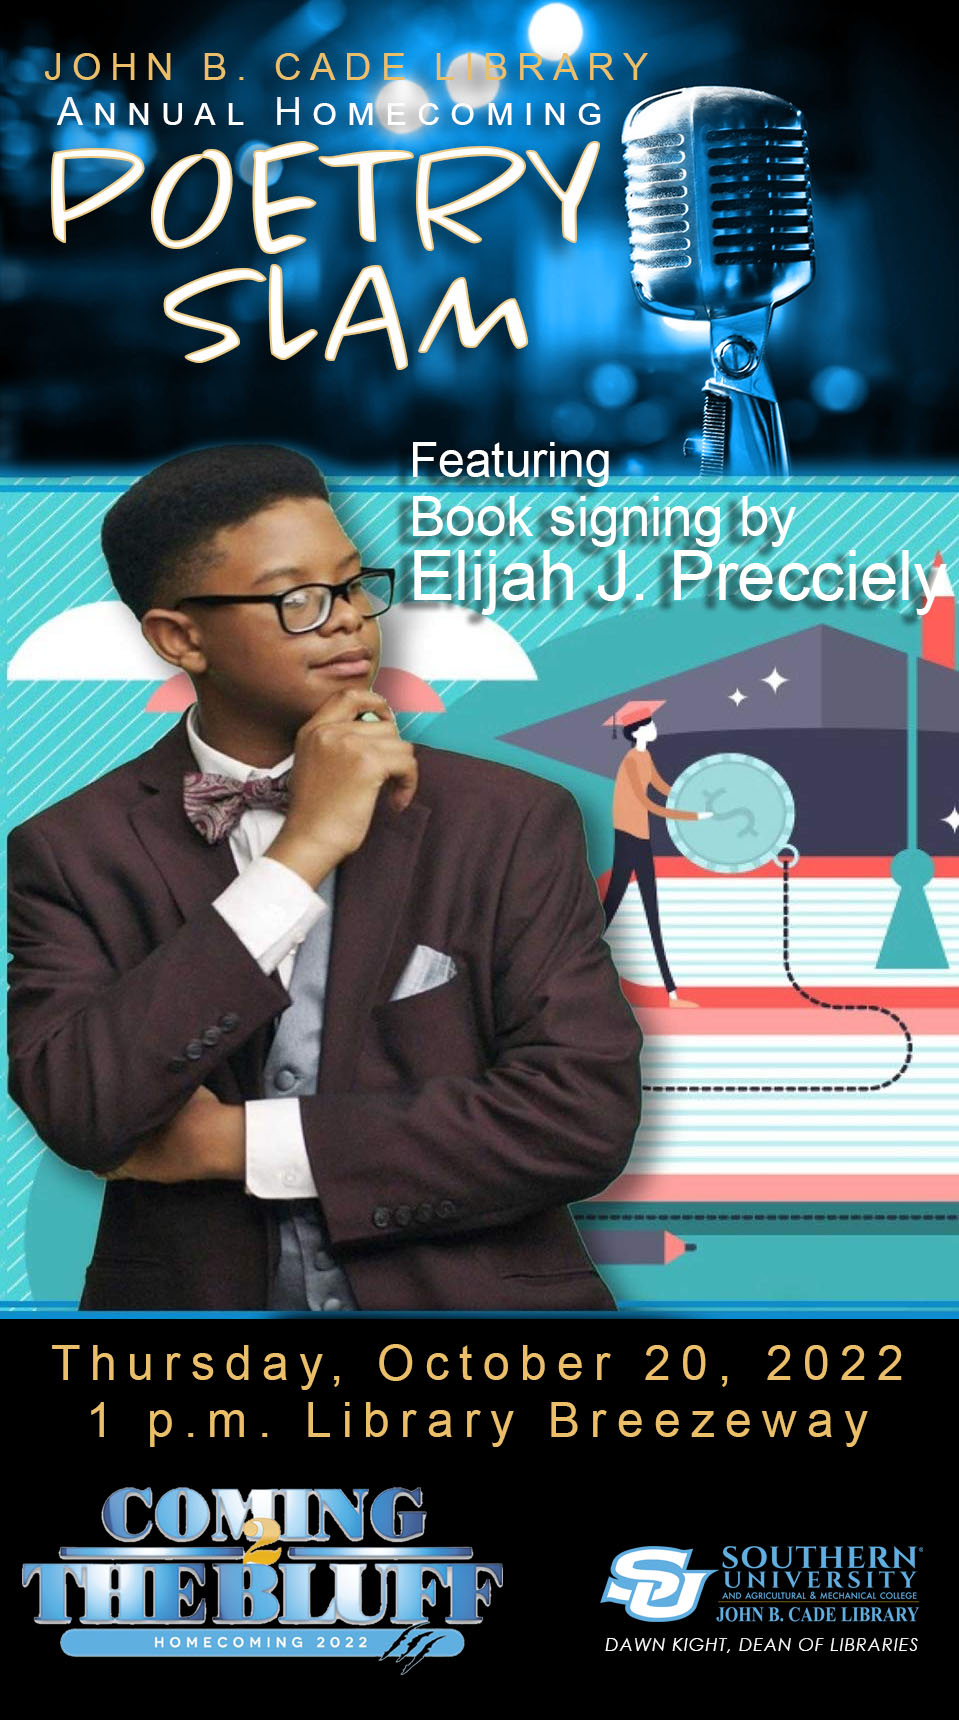 Poetry Slam featuring a Book Signing by Elijah J. Precciely